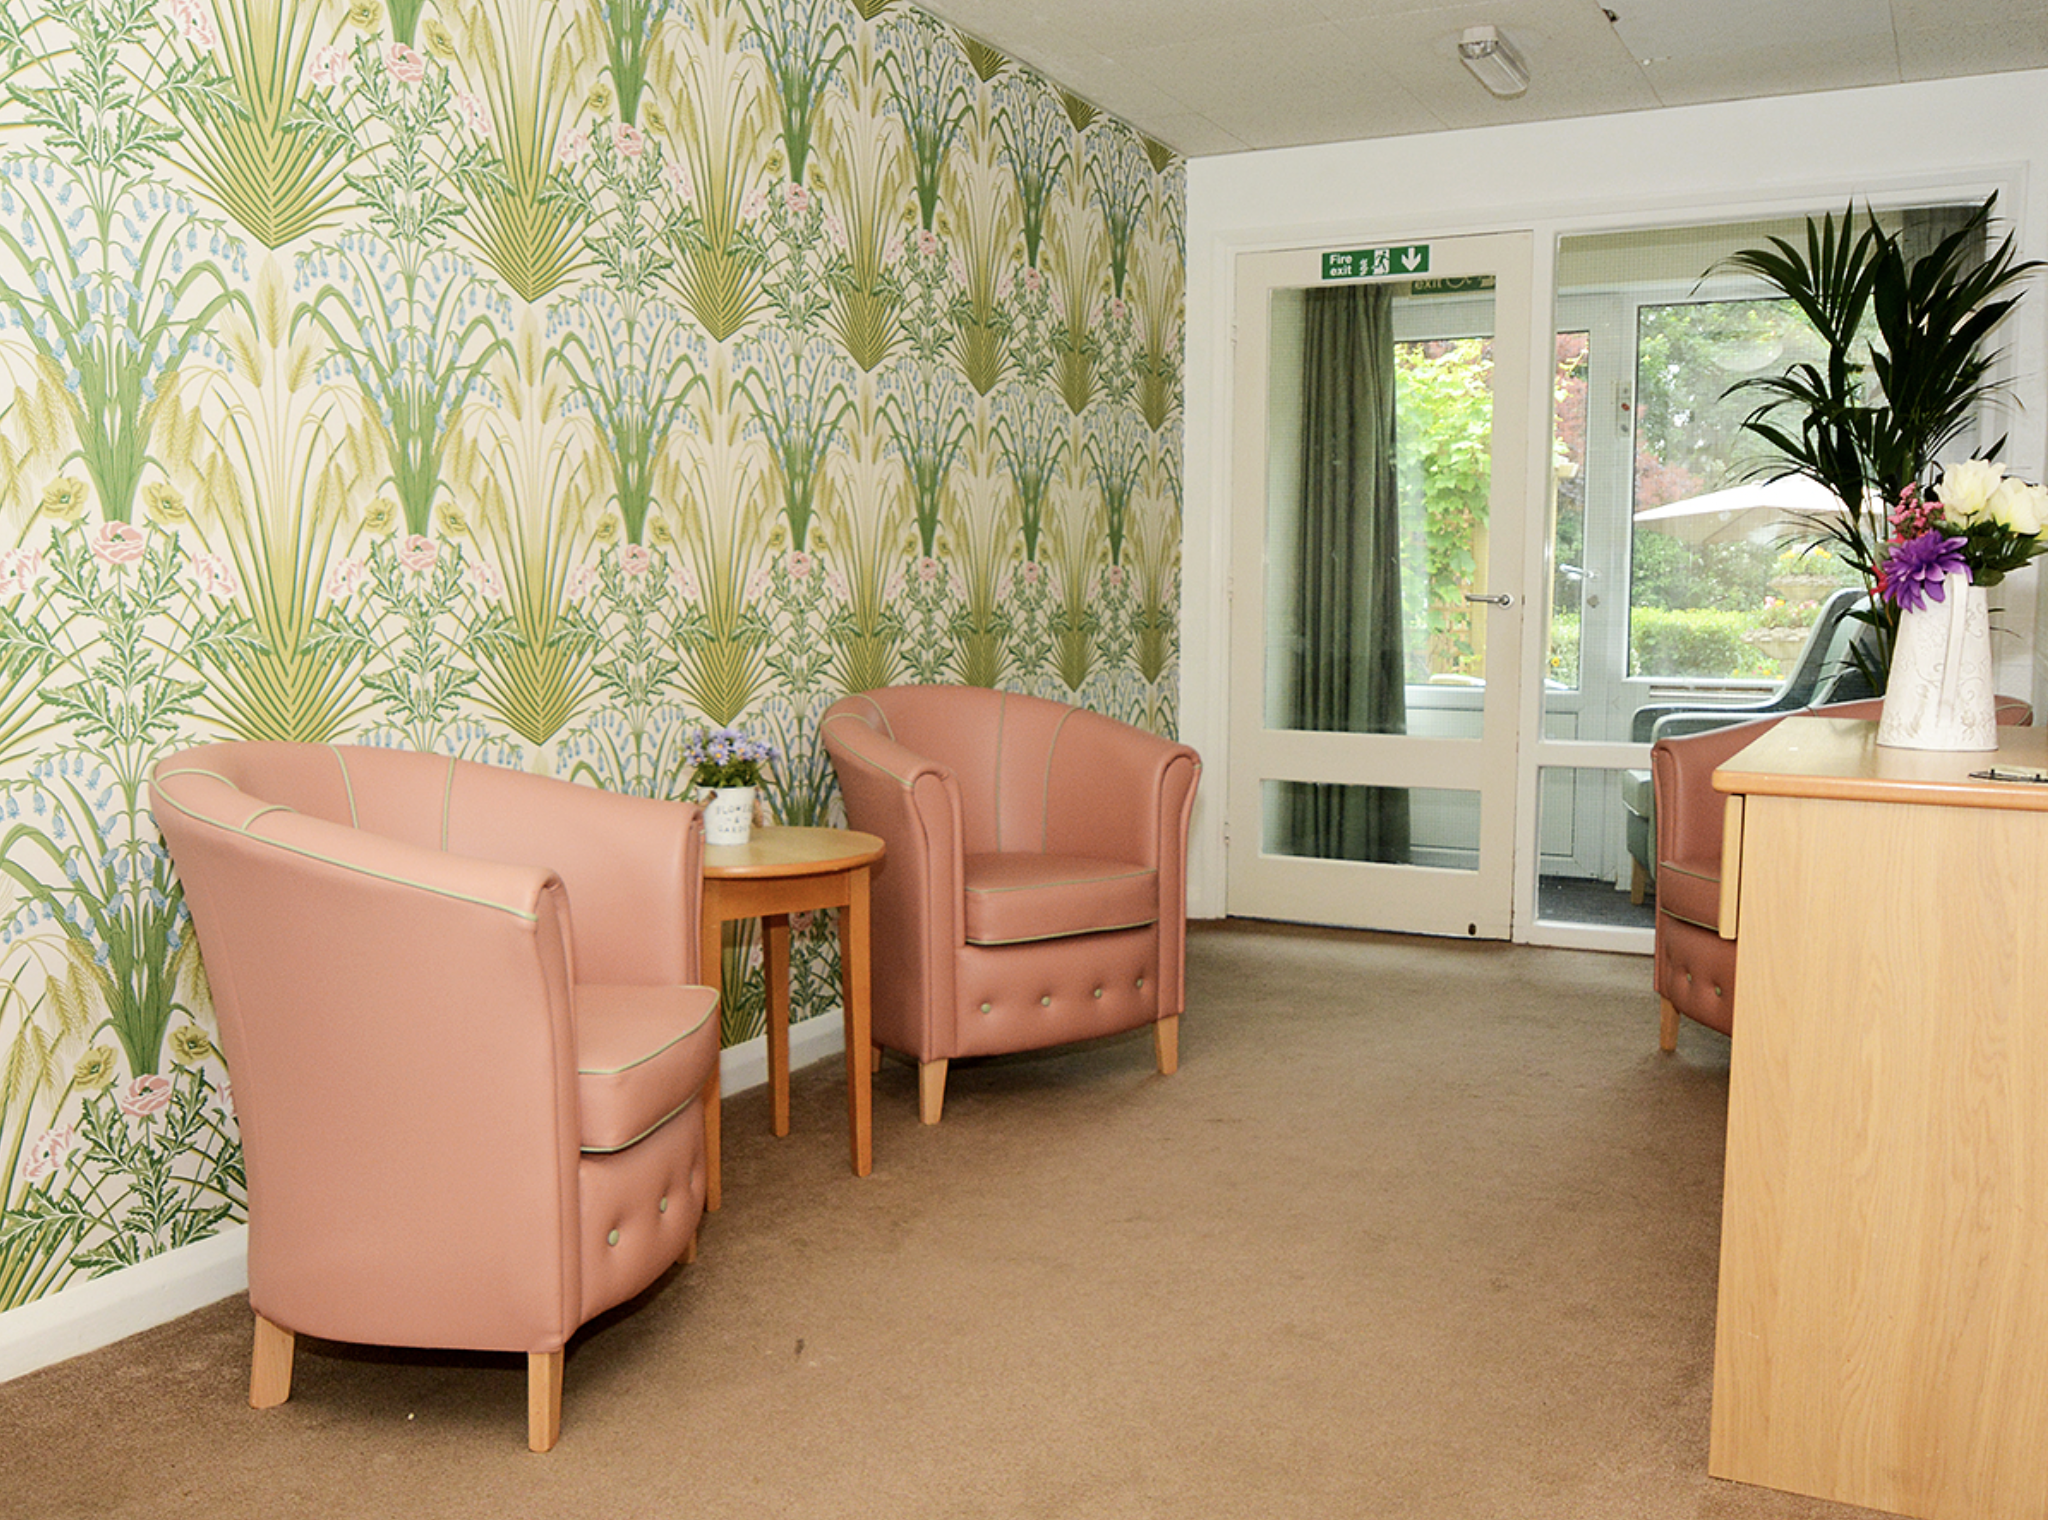 Lounge of Dorset House care home in Poole, Hampshire